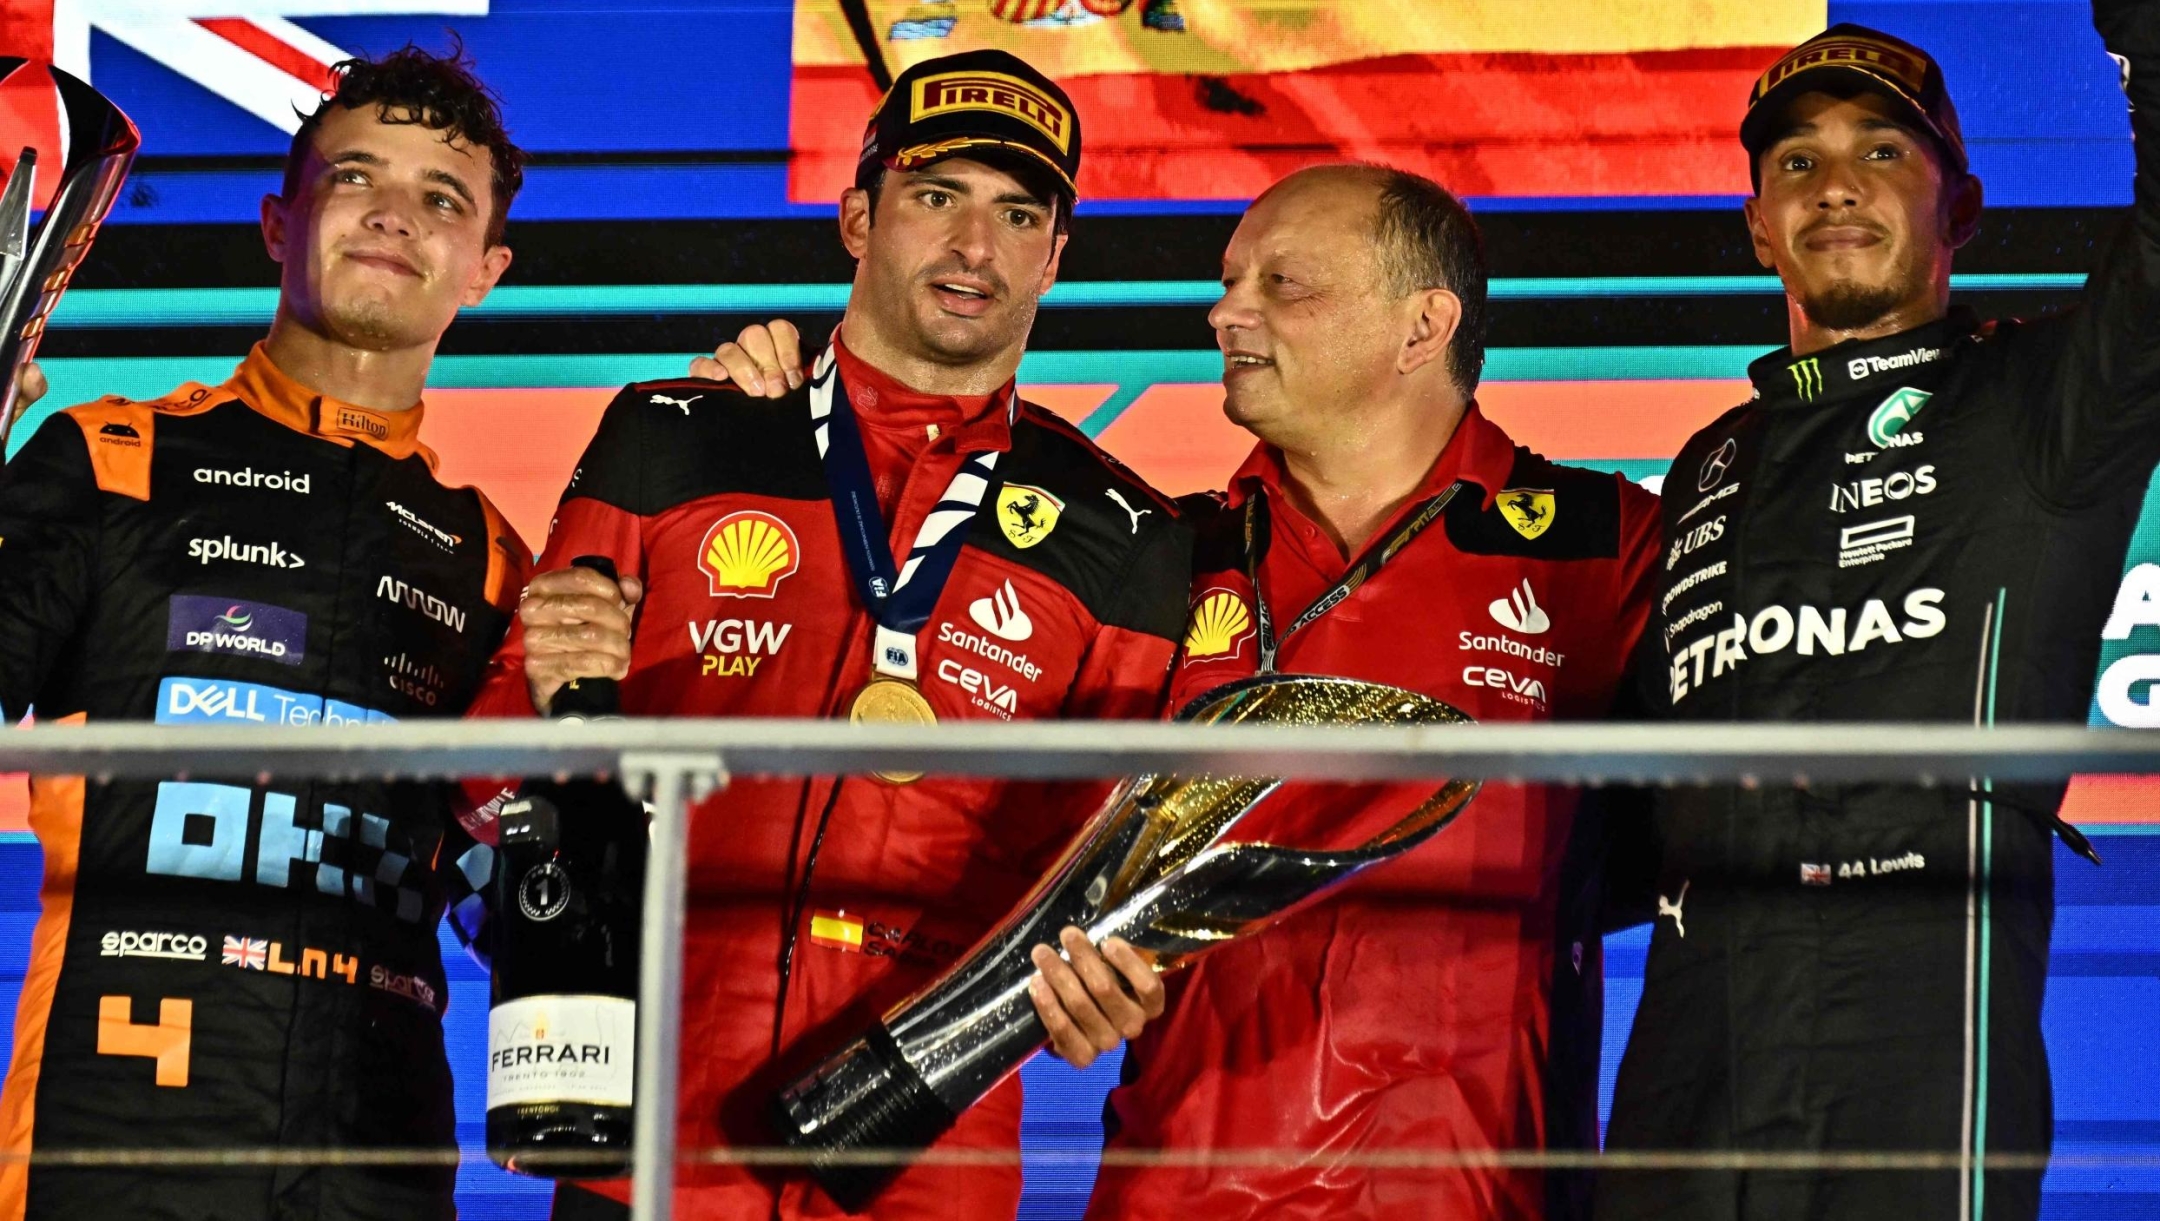 Ferrari's Spanish driver Carlos Sainz Jr (2nd L) celebrates on the podium with Ferrari team principal Frederic Vasseur (2nd R) after winning the Singapore Formula One Grand Prix night race, with McLaren's British driver Lando Norris (L) who finished second and Mercedes' British driver Lewis Hamilton who finished third (R), at the Marina Bay Street Circuit in Singapore on September 17, 2023. (Photo by Lillian SUWANRUMPHA / AFP)